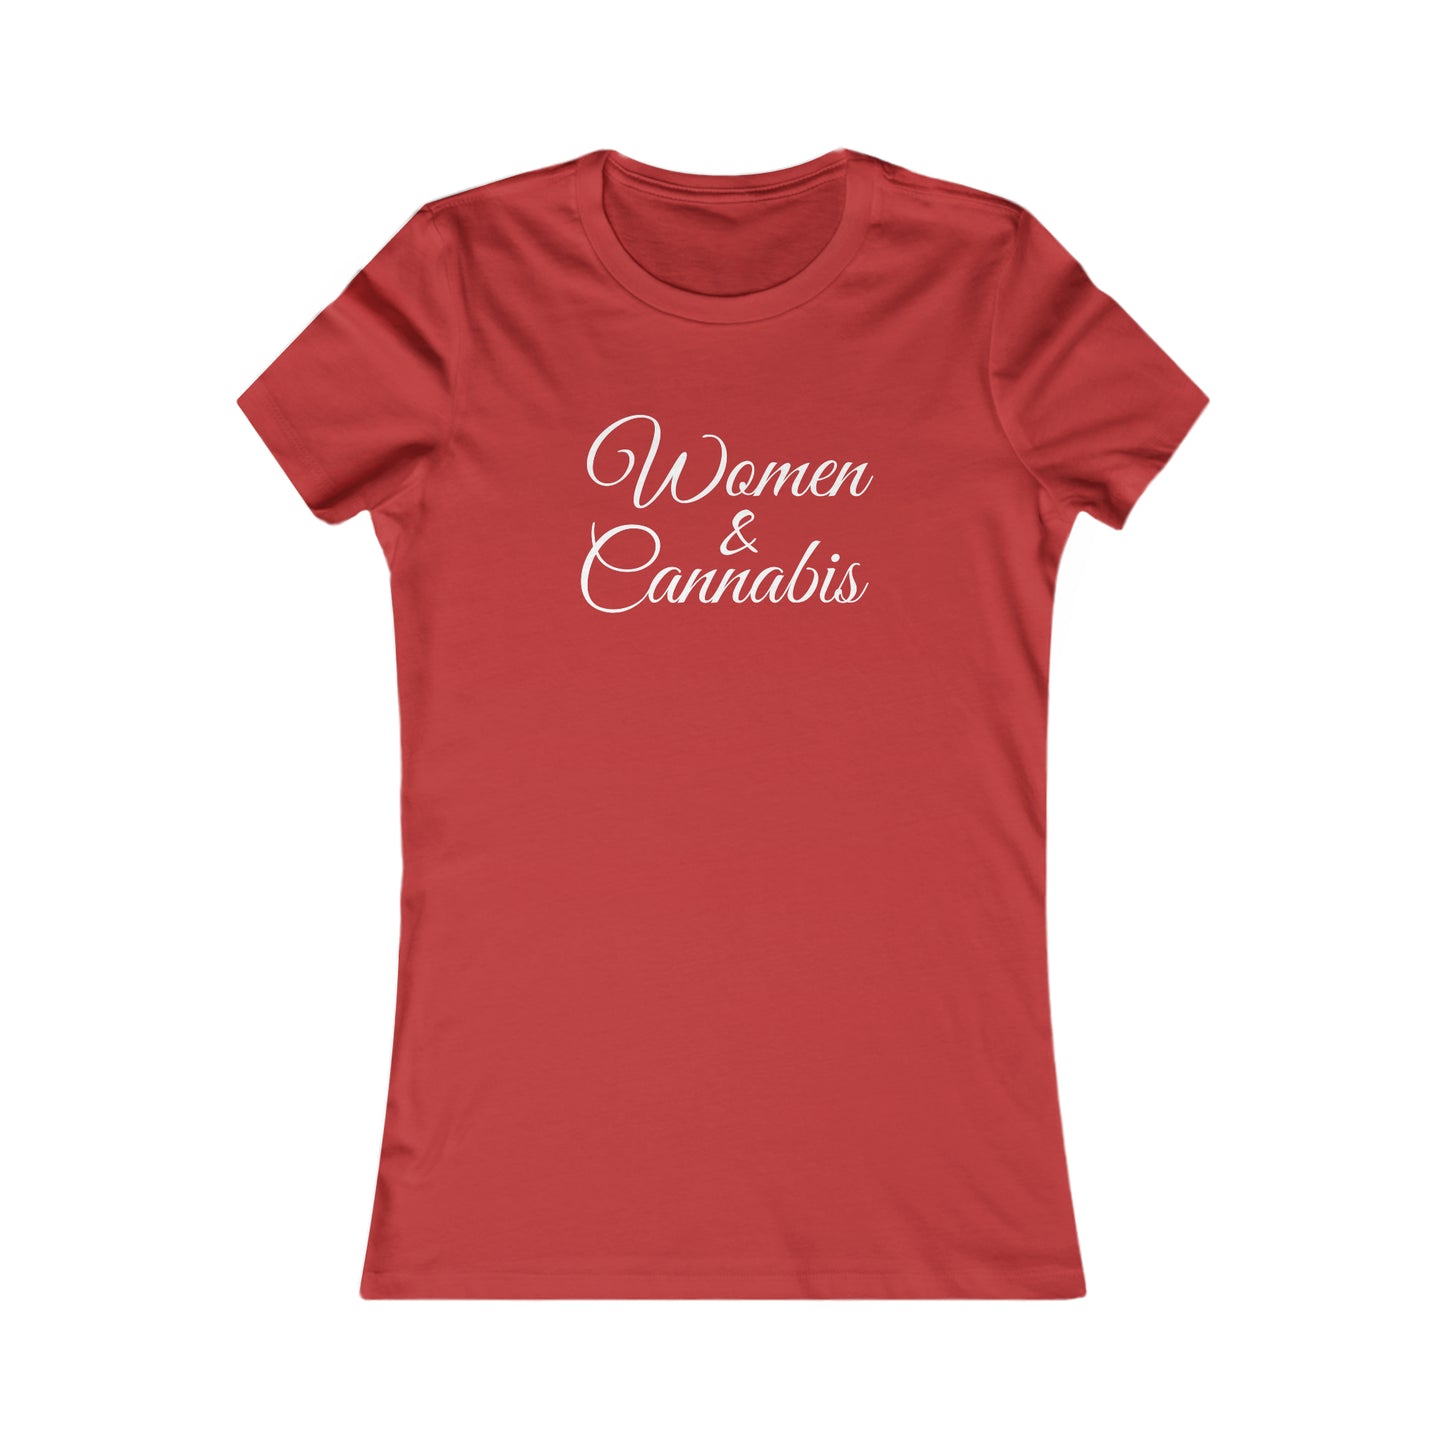 Women & Cannabis Favorite Tee with White Font